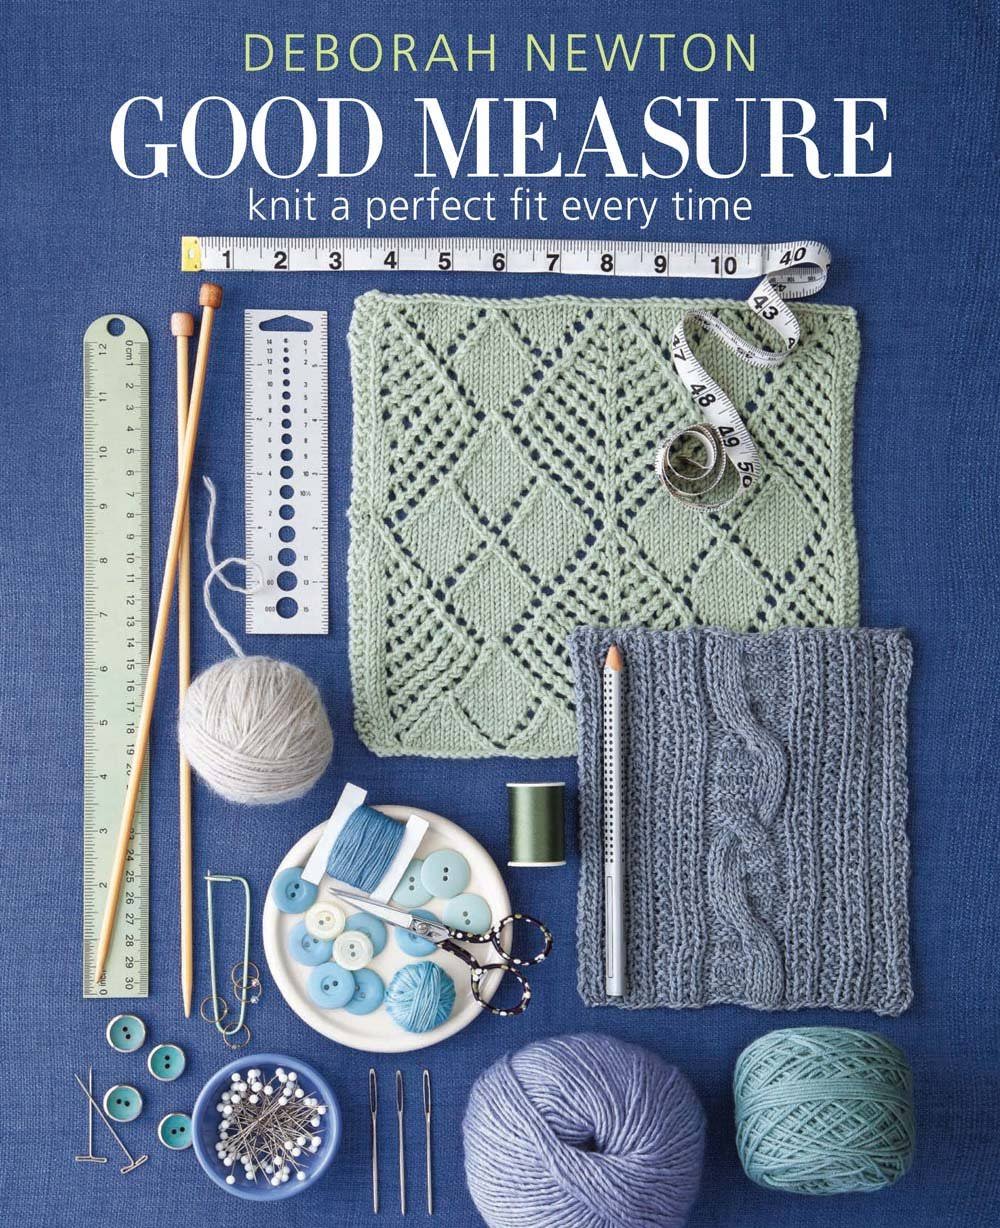 Good Measure: Knit a Perfect Fit Every Time - Deborah A. Newton